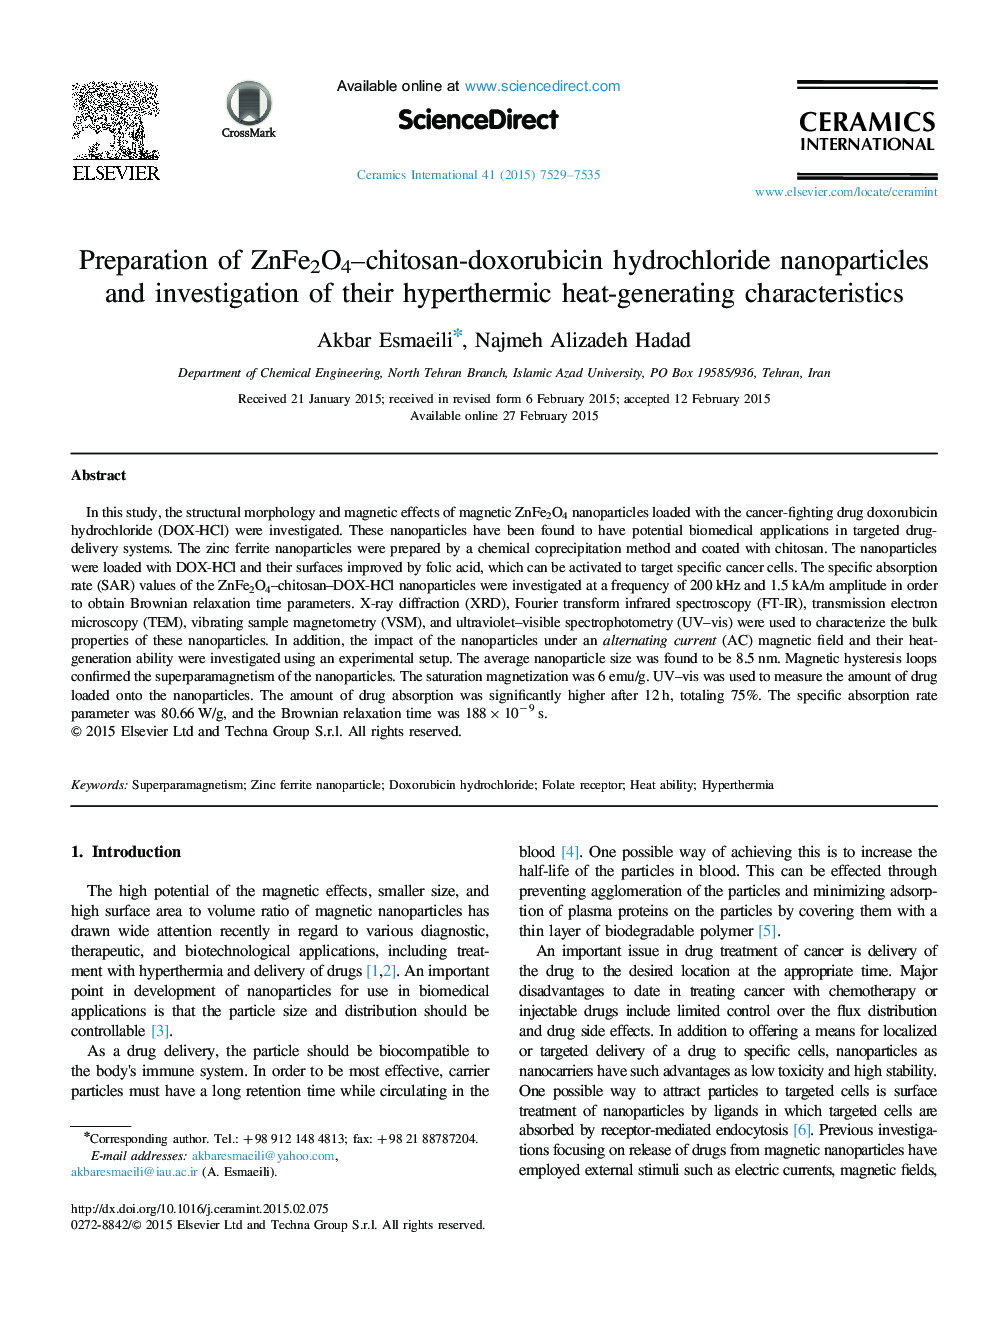 Preparation of ZnFe2O4–chitosan-doxorubicin hydrochloride nanoparticles and investigation of their hyperthermic heat-generating characteristics